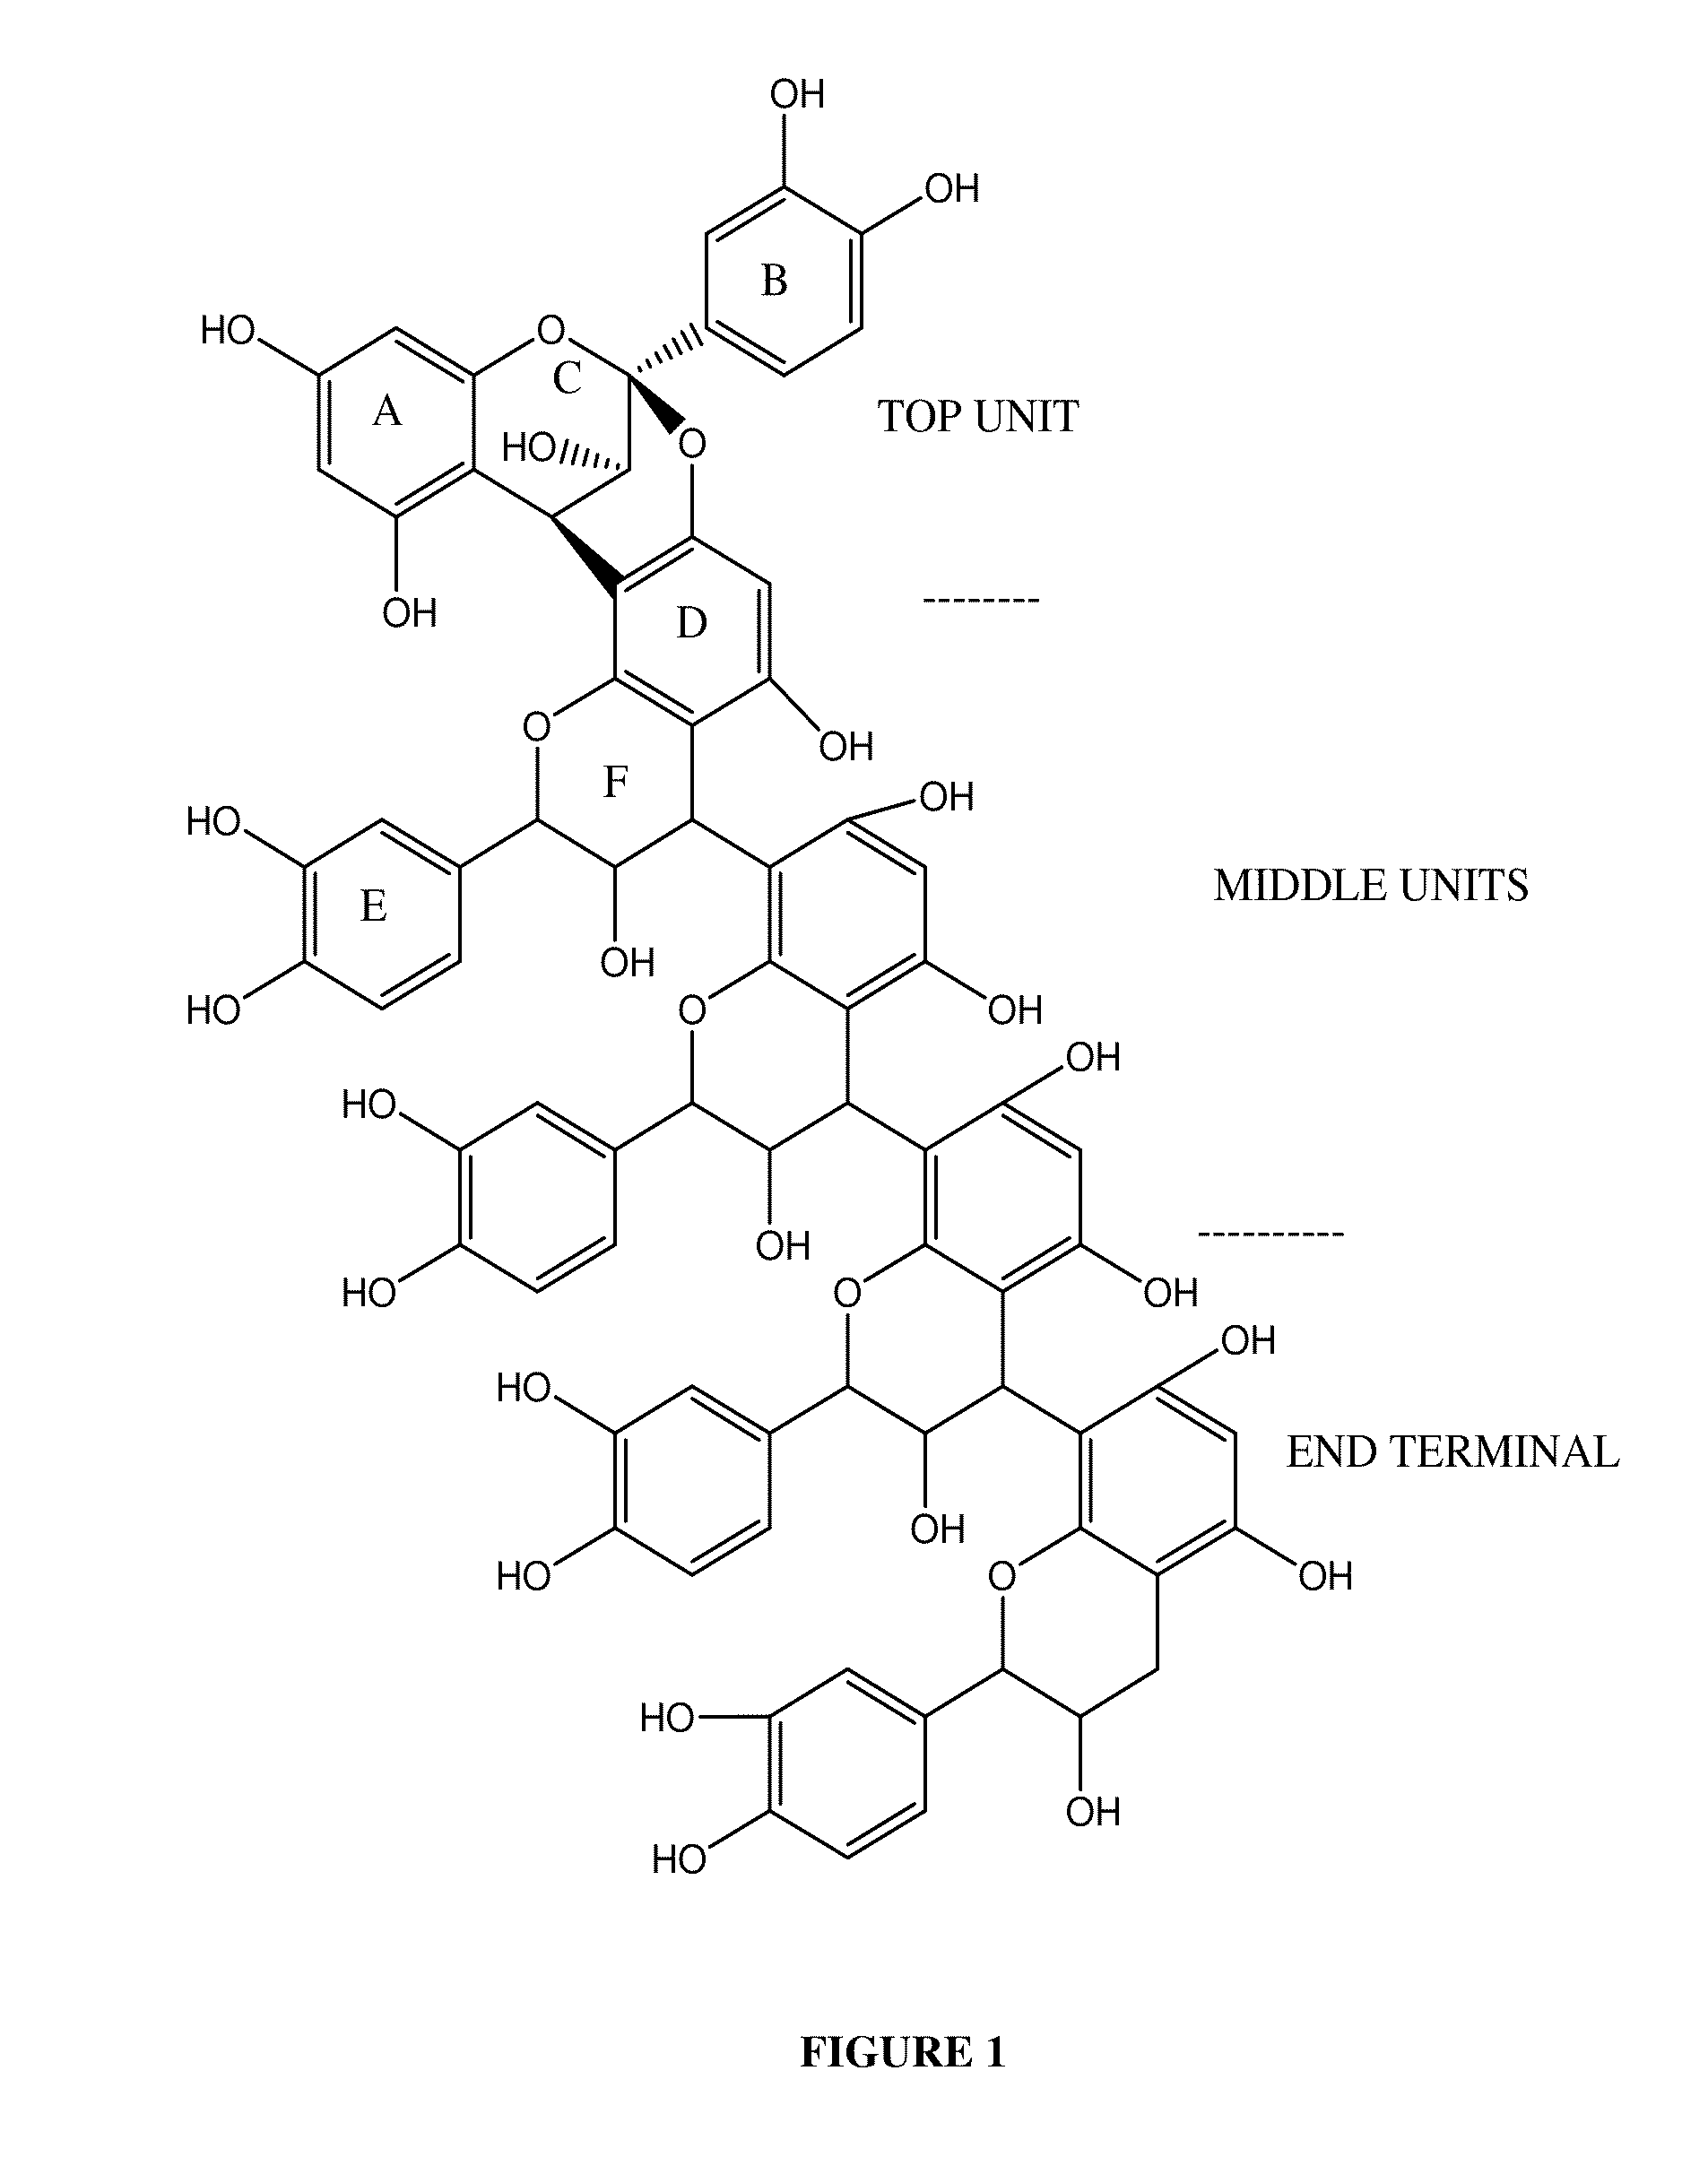 Novel standardized composition, method of manufacture and use in the resolution of RNA virus infection